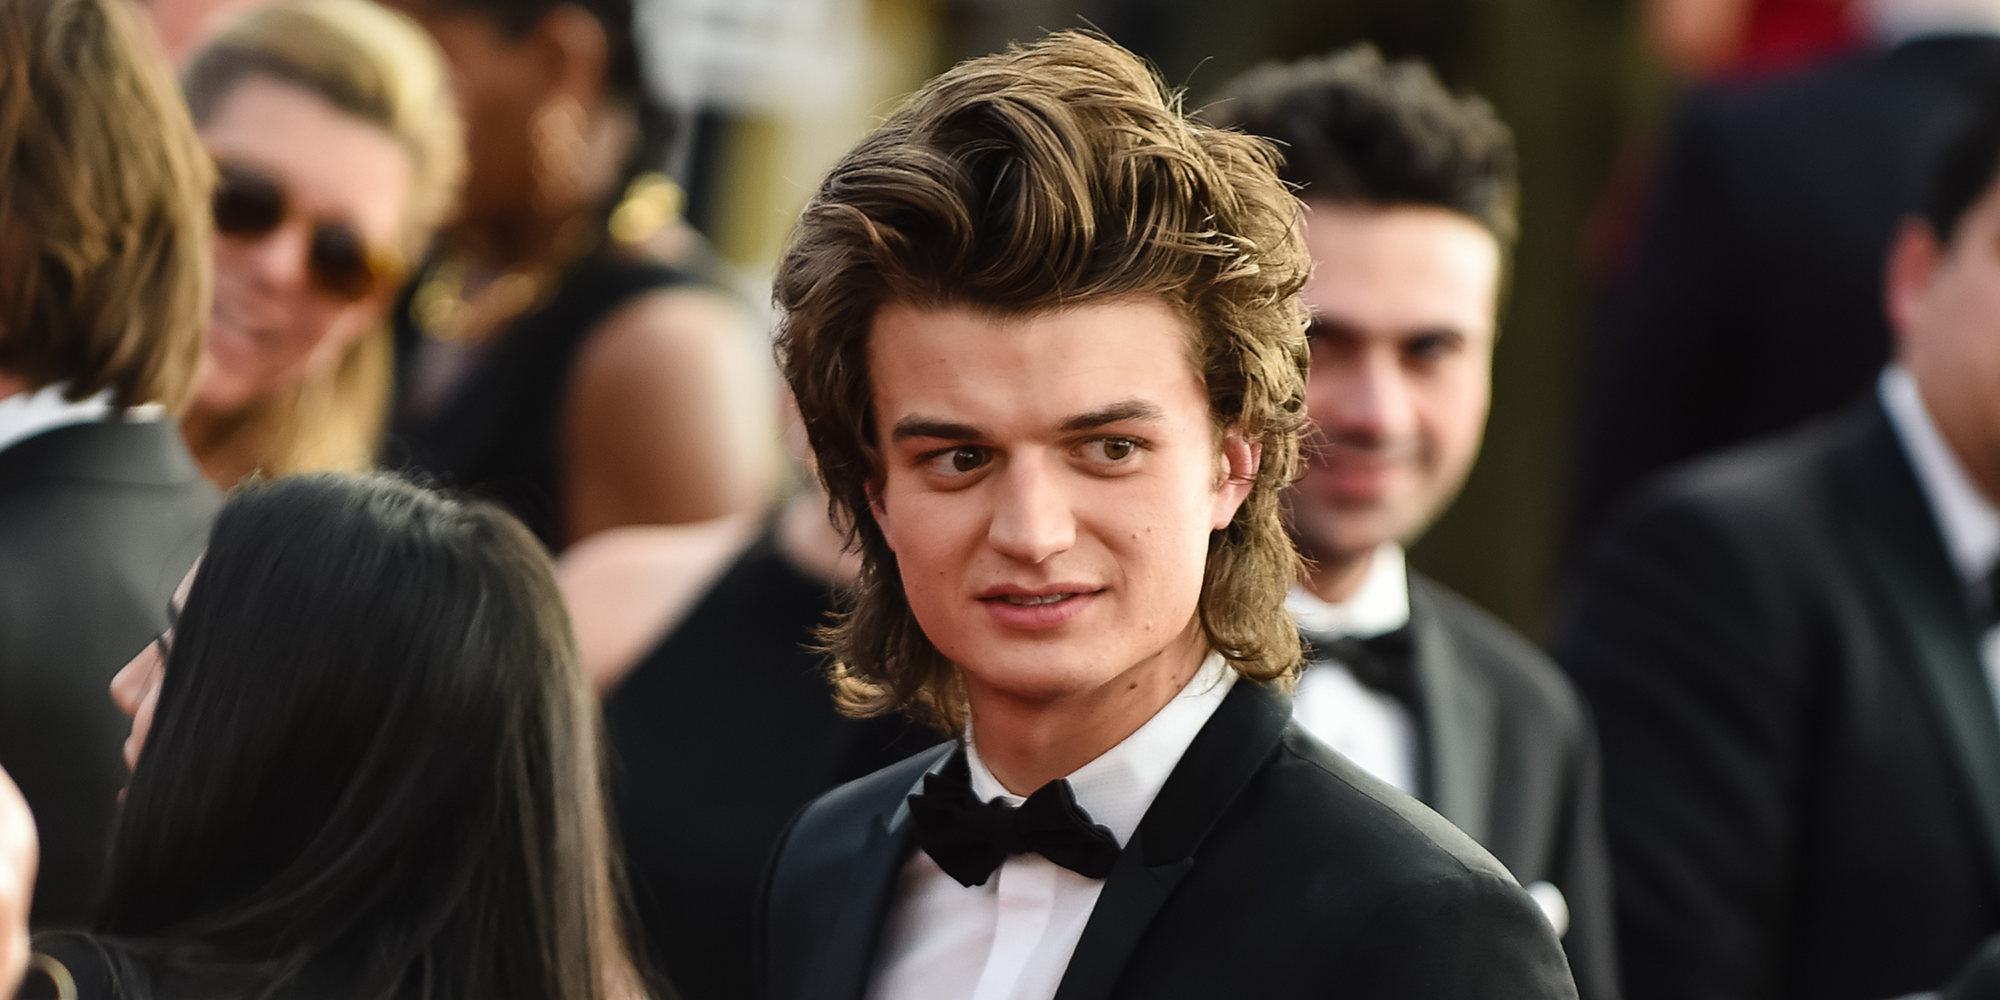 Stranger Things star Joe Keery shows off unrecognisable new look